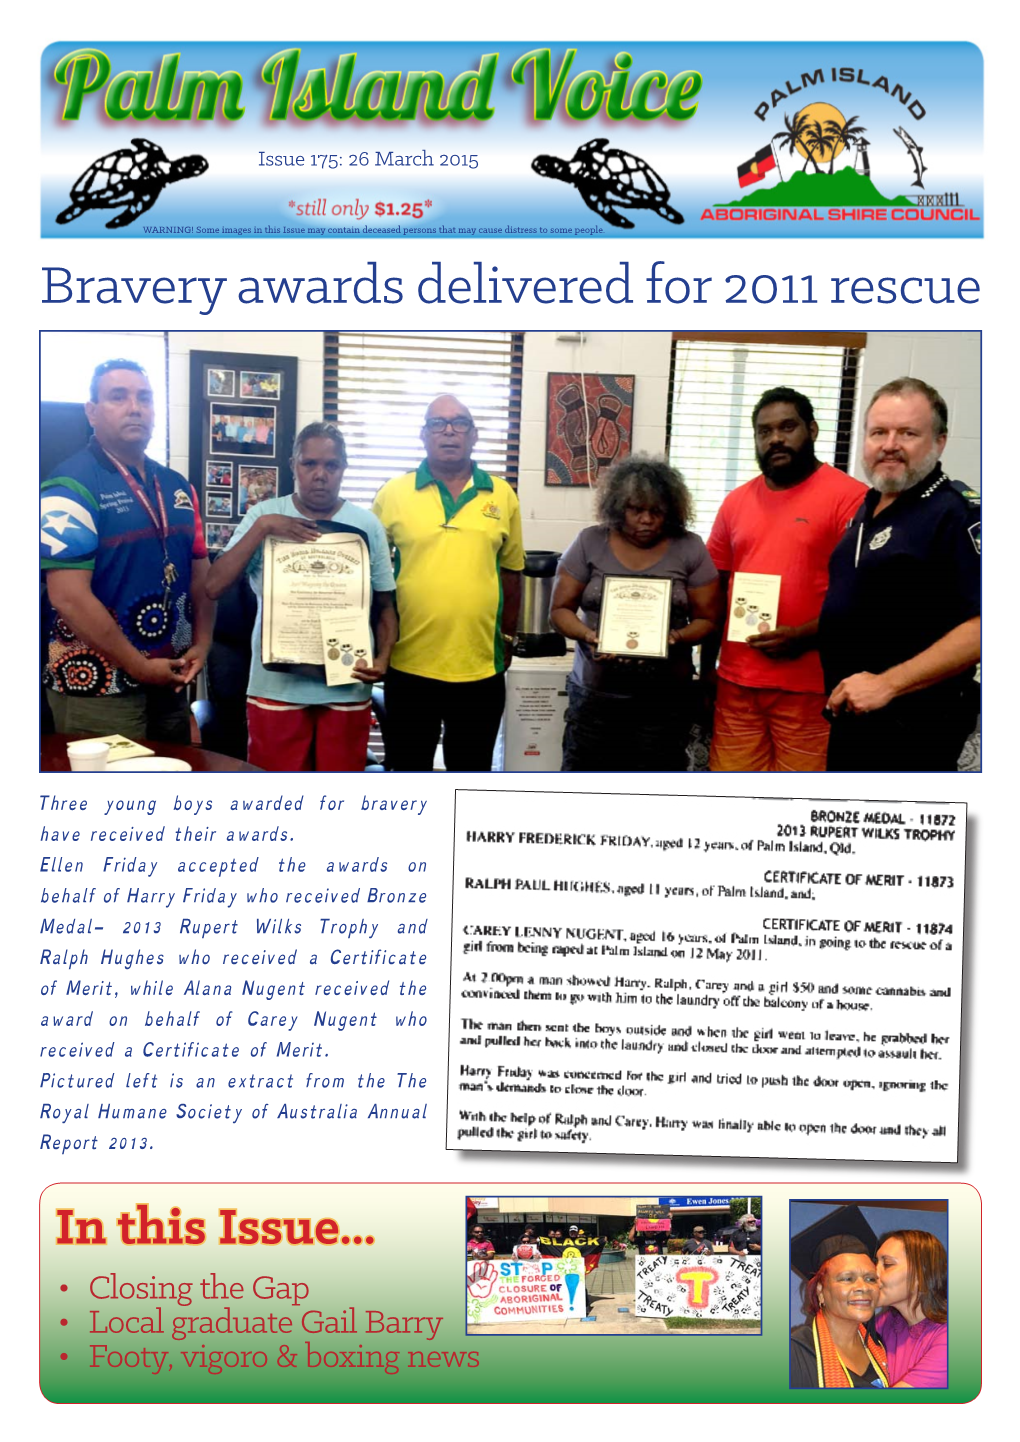 Bravery Awards Delivered for 2011 Rescue